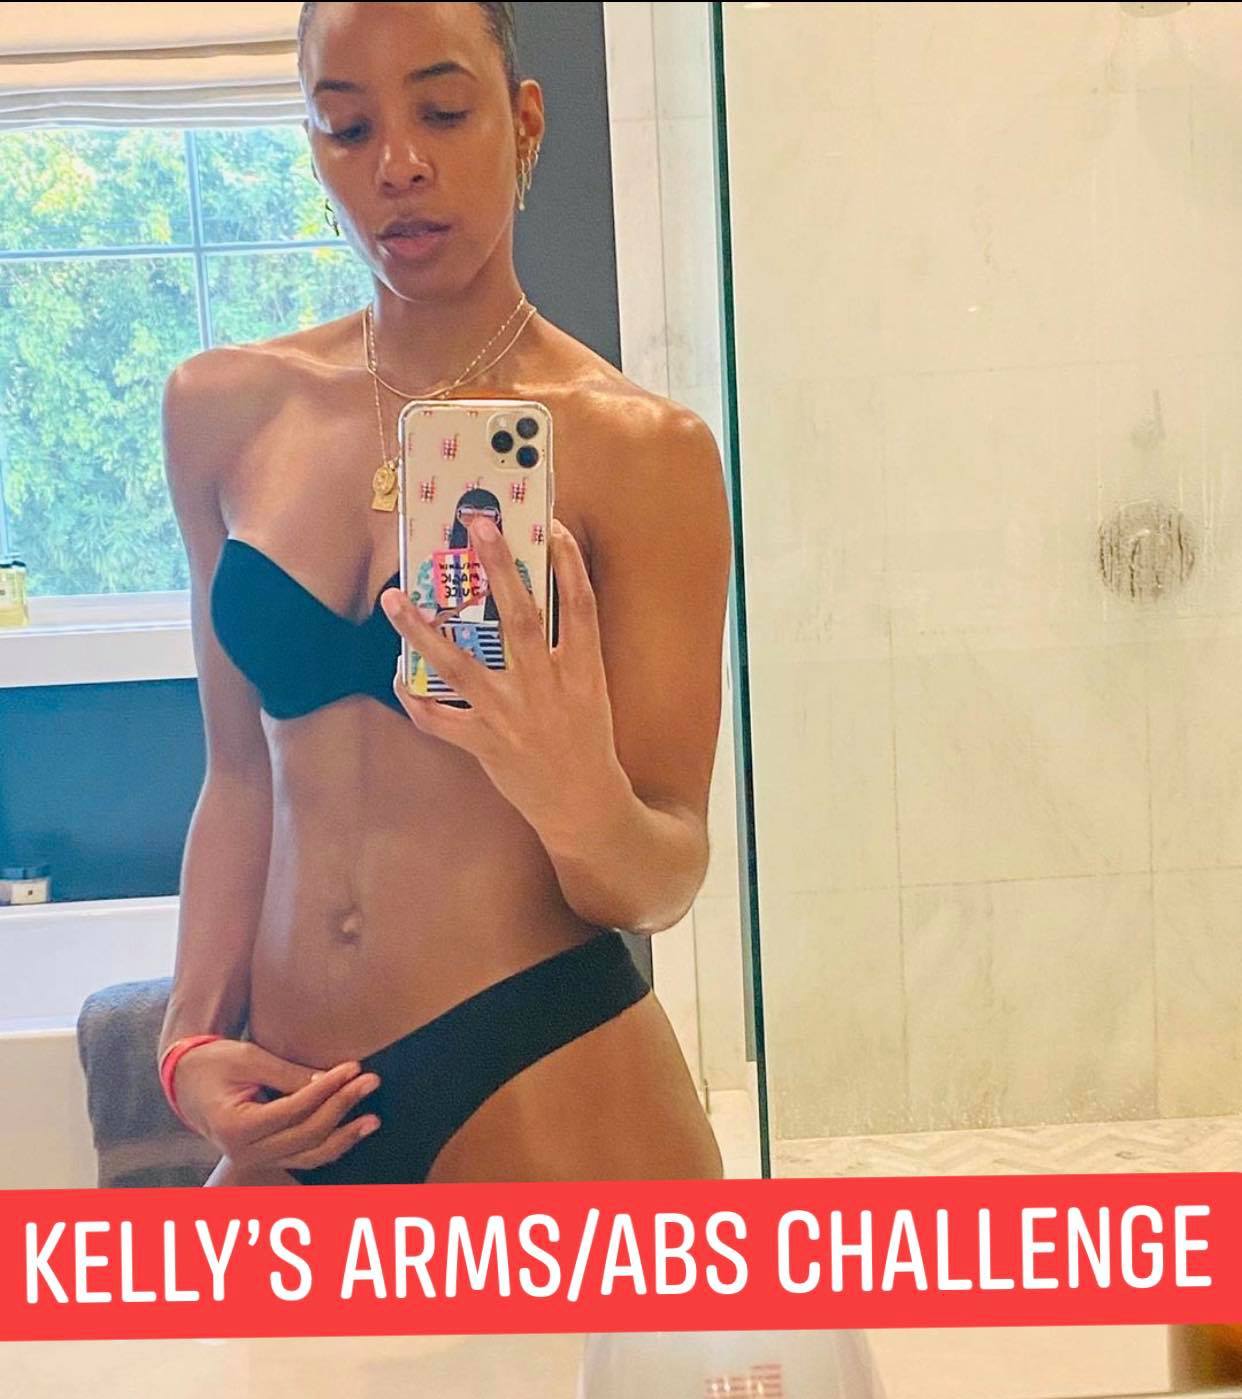 THE KELLY ROWLAND HOTTIE BAWDIE 7 Day Challenge